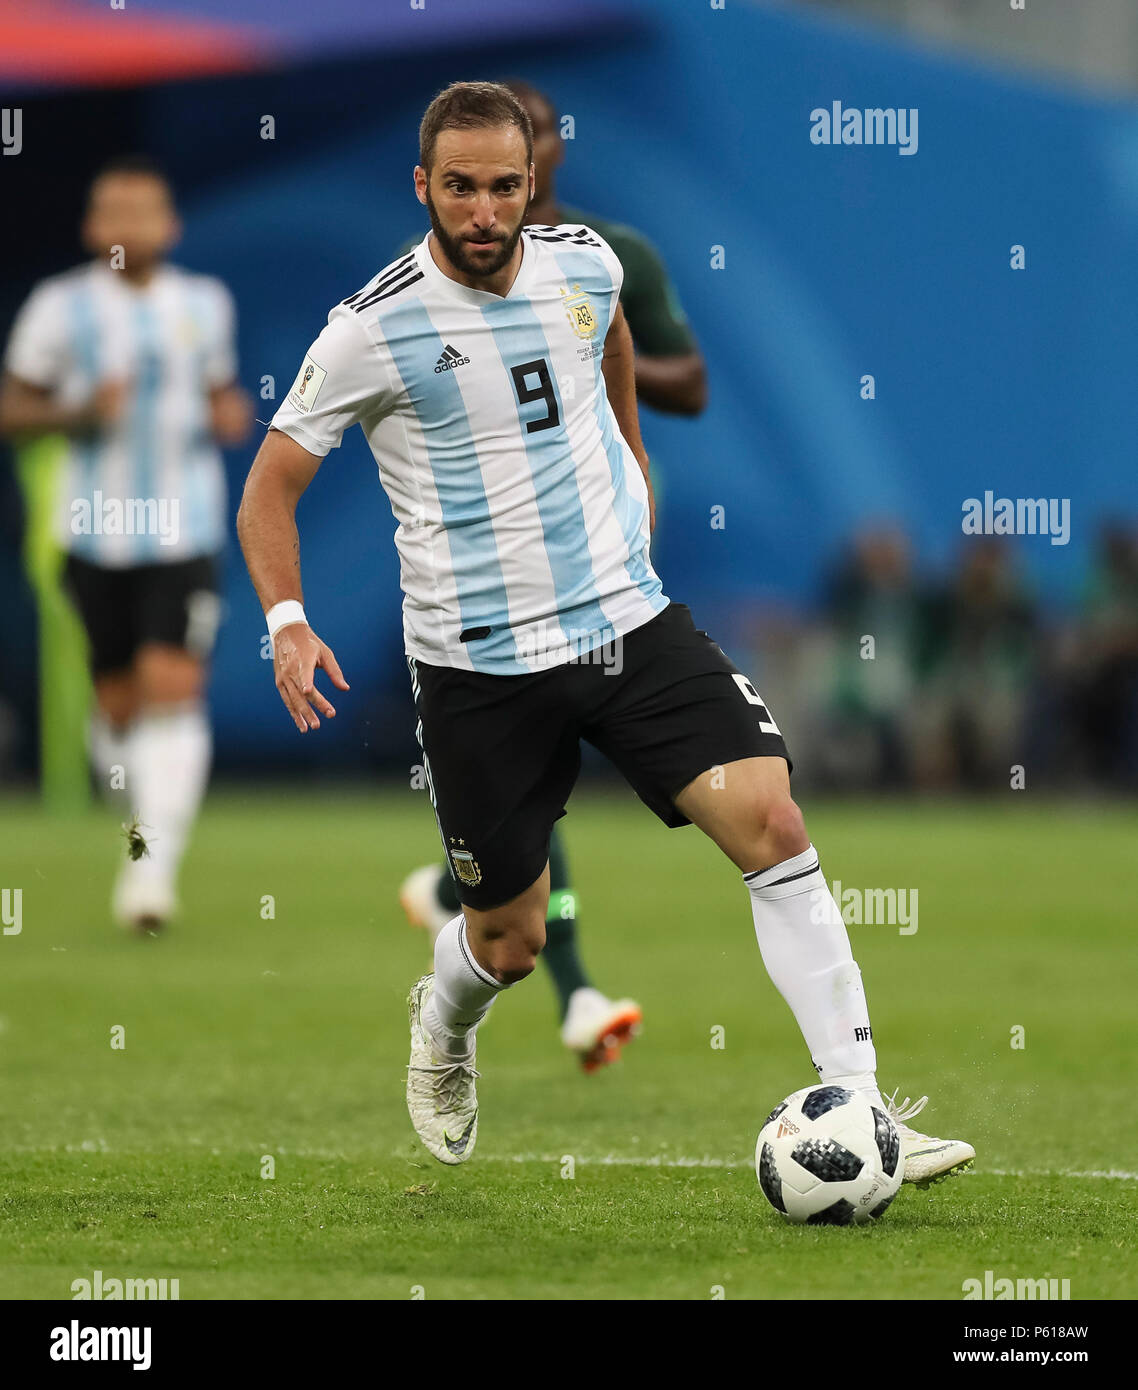 St Petersburg, Russia. 26th Jun, 2018. Gonzalo Higuain of Argentina during the 2018 FIFA World Cup Group D match between Nigeria and Argentina at Saint Petersburg Stadium on June 26th 2018 in Saint Petersburg, Russia. (Photo by Daniel Chesterton/phcimages.com) Credit: PHC Images/Alamy Live News Stock Photo